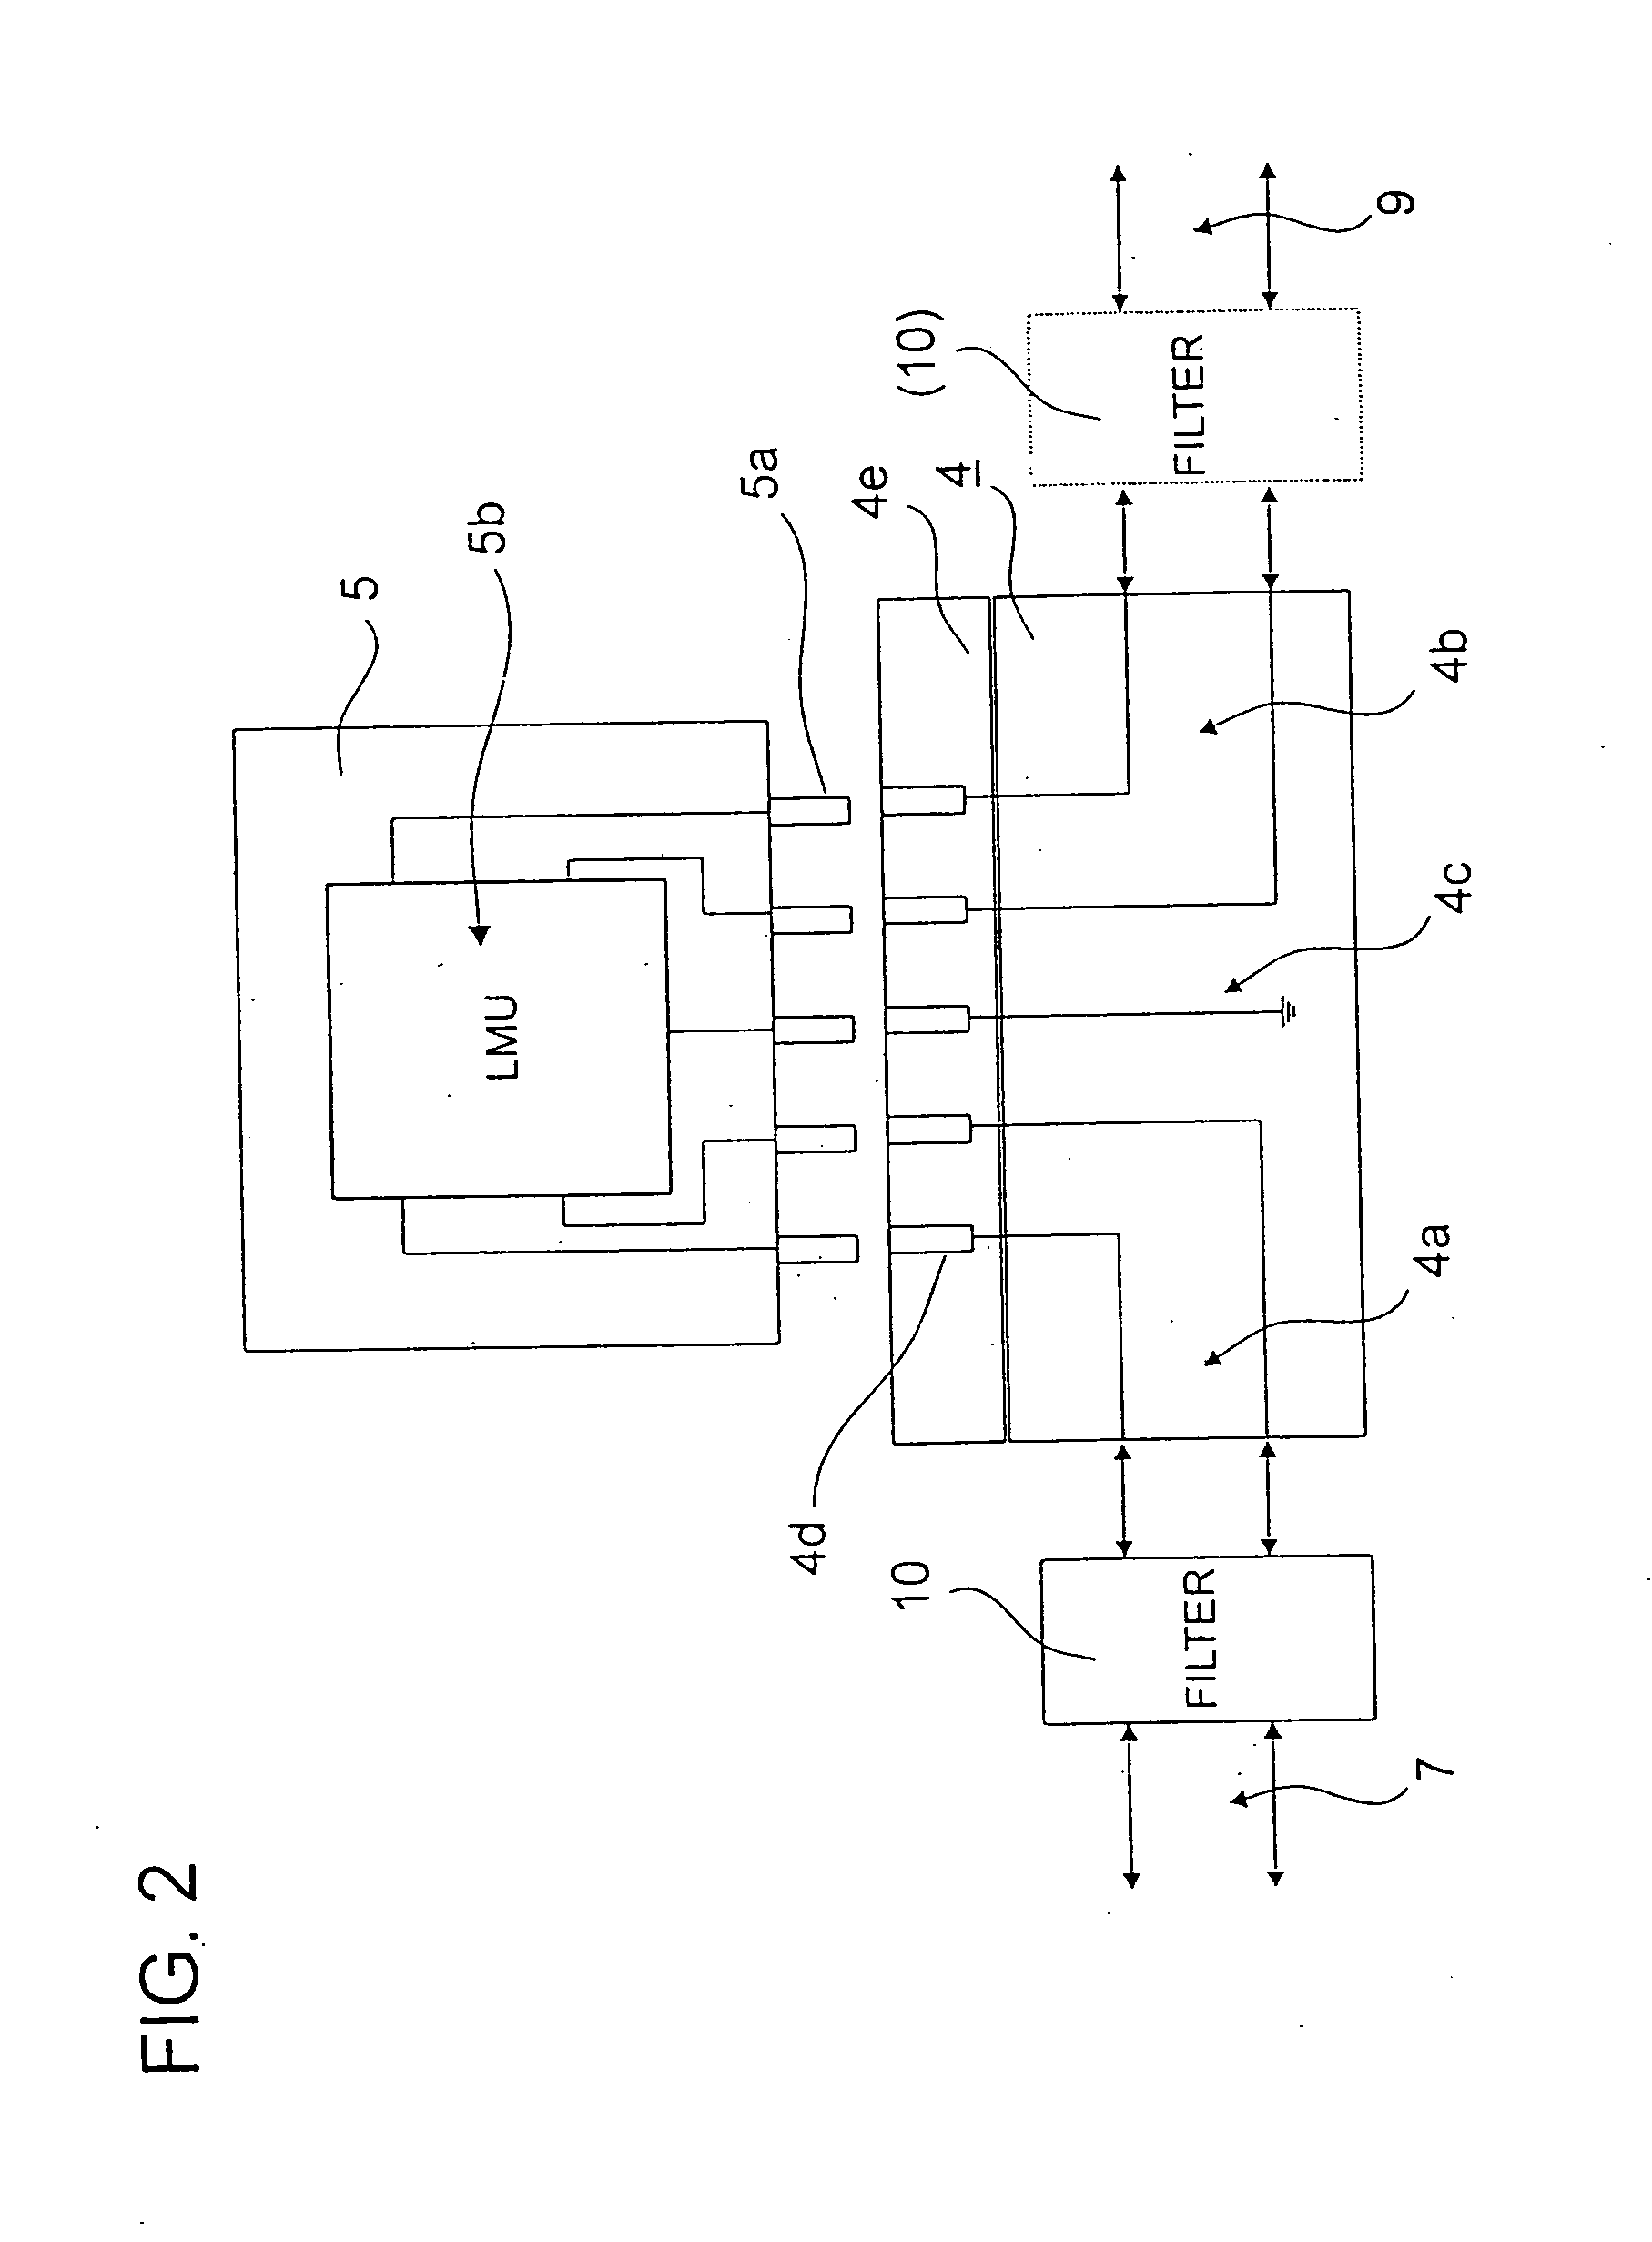 Method and apparatus for spectral containment over telephone service lines